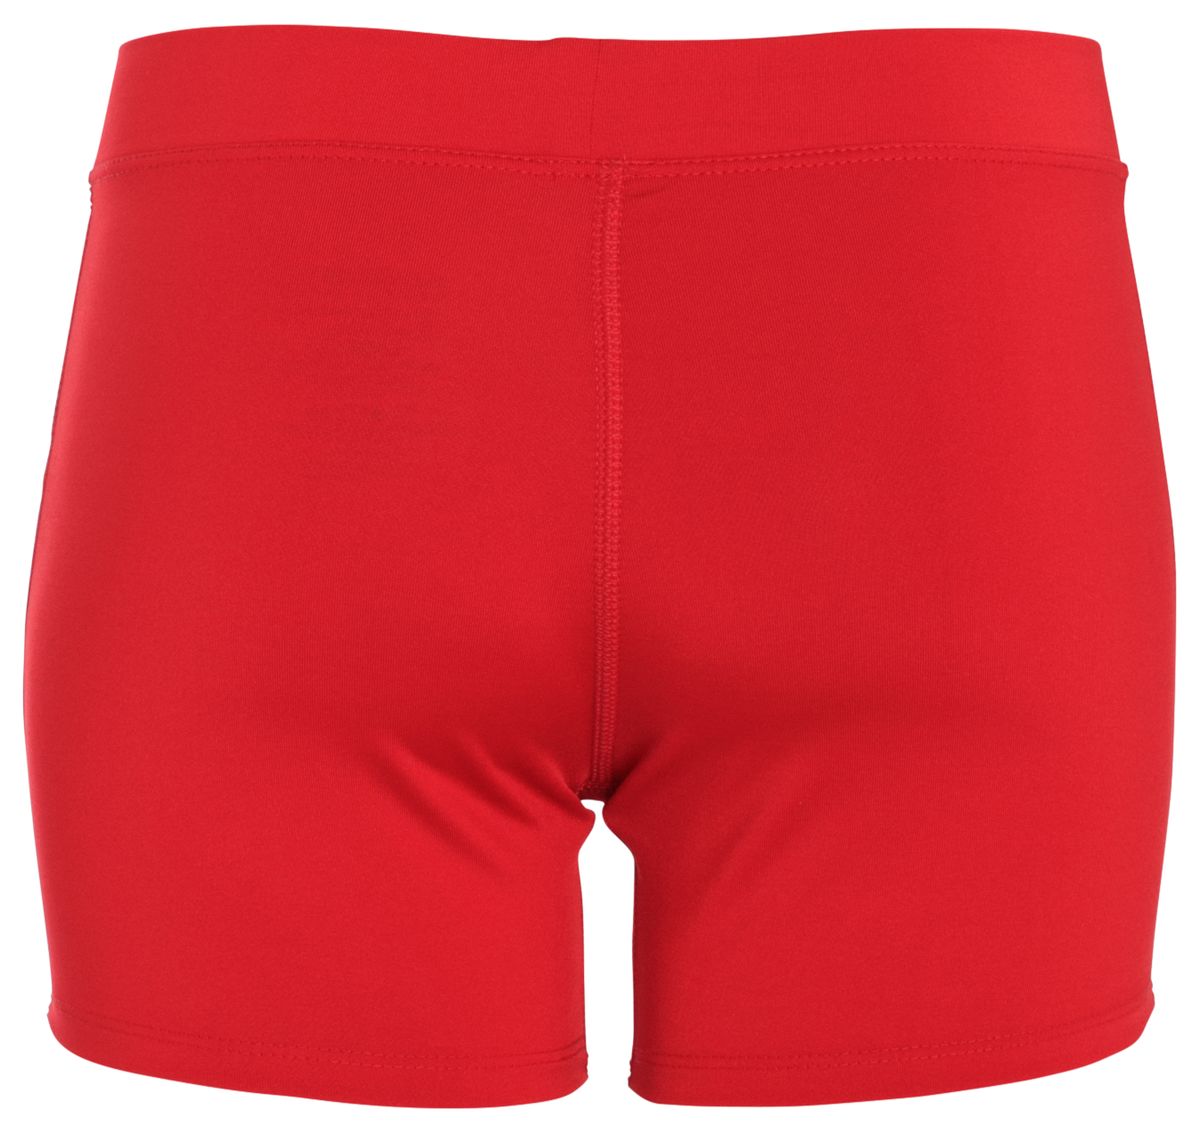 Augusta Sportswear Women's Enthuse Volleyball Short, Red, M - image 4 of 5